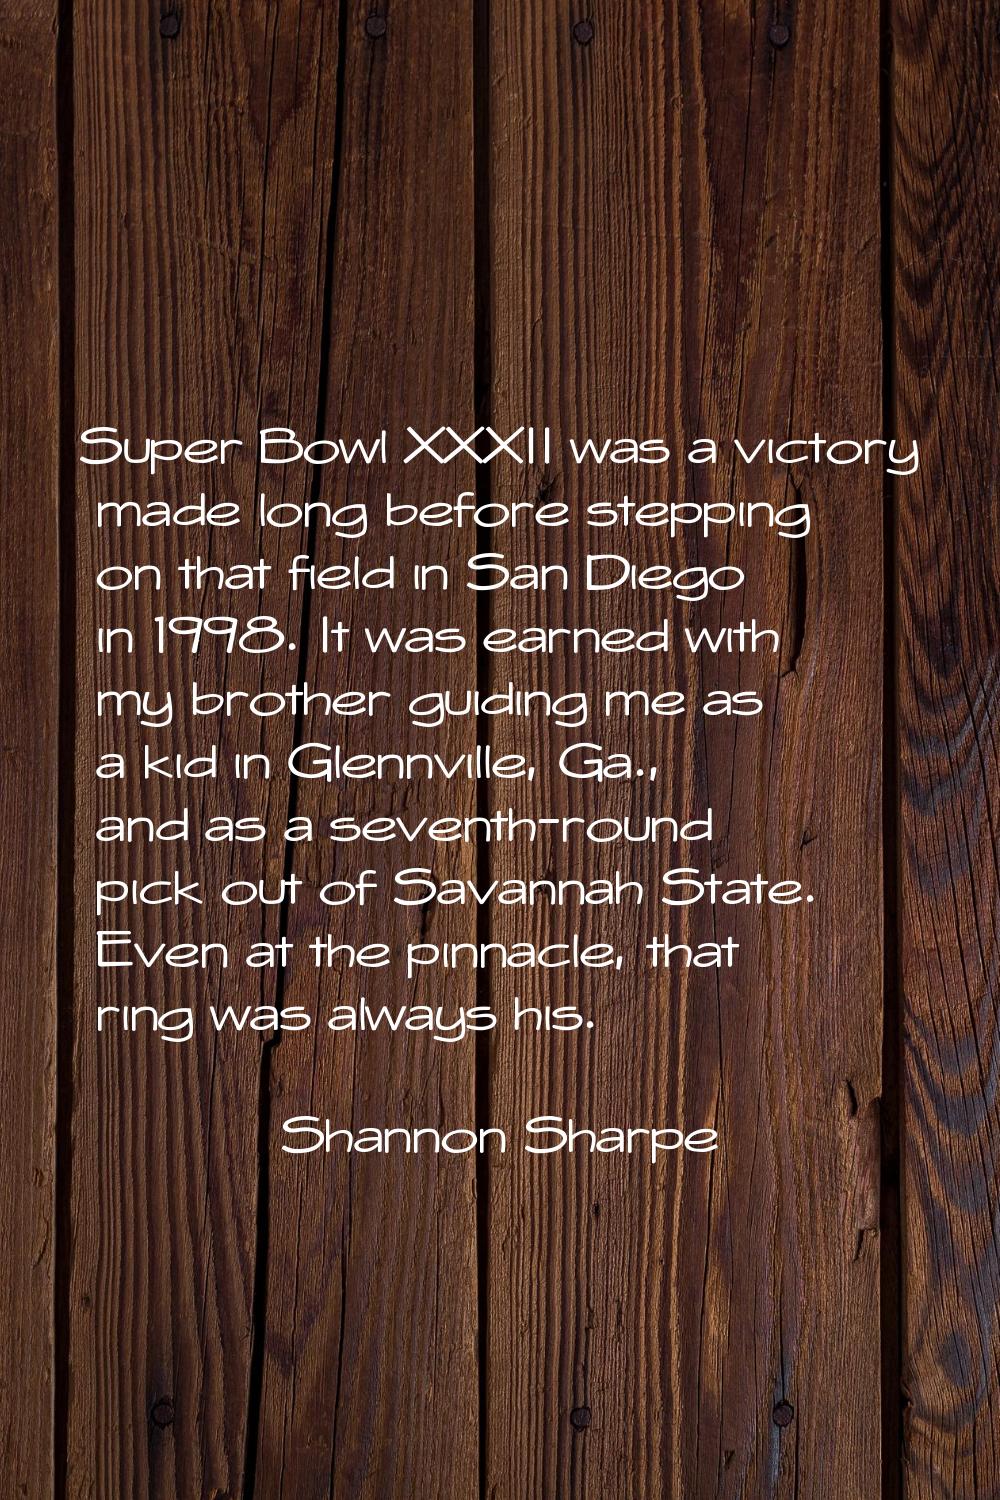 Super Bowl XXXII was a victory made long before stepping on that field in San Diego in 1998. It was